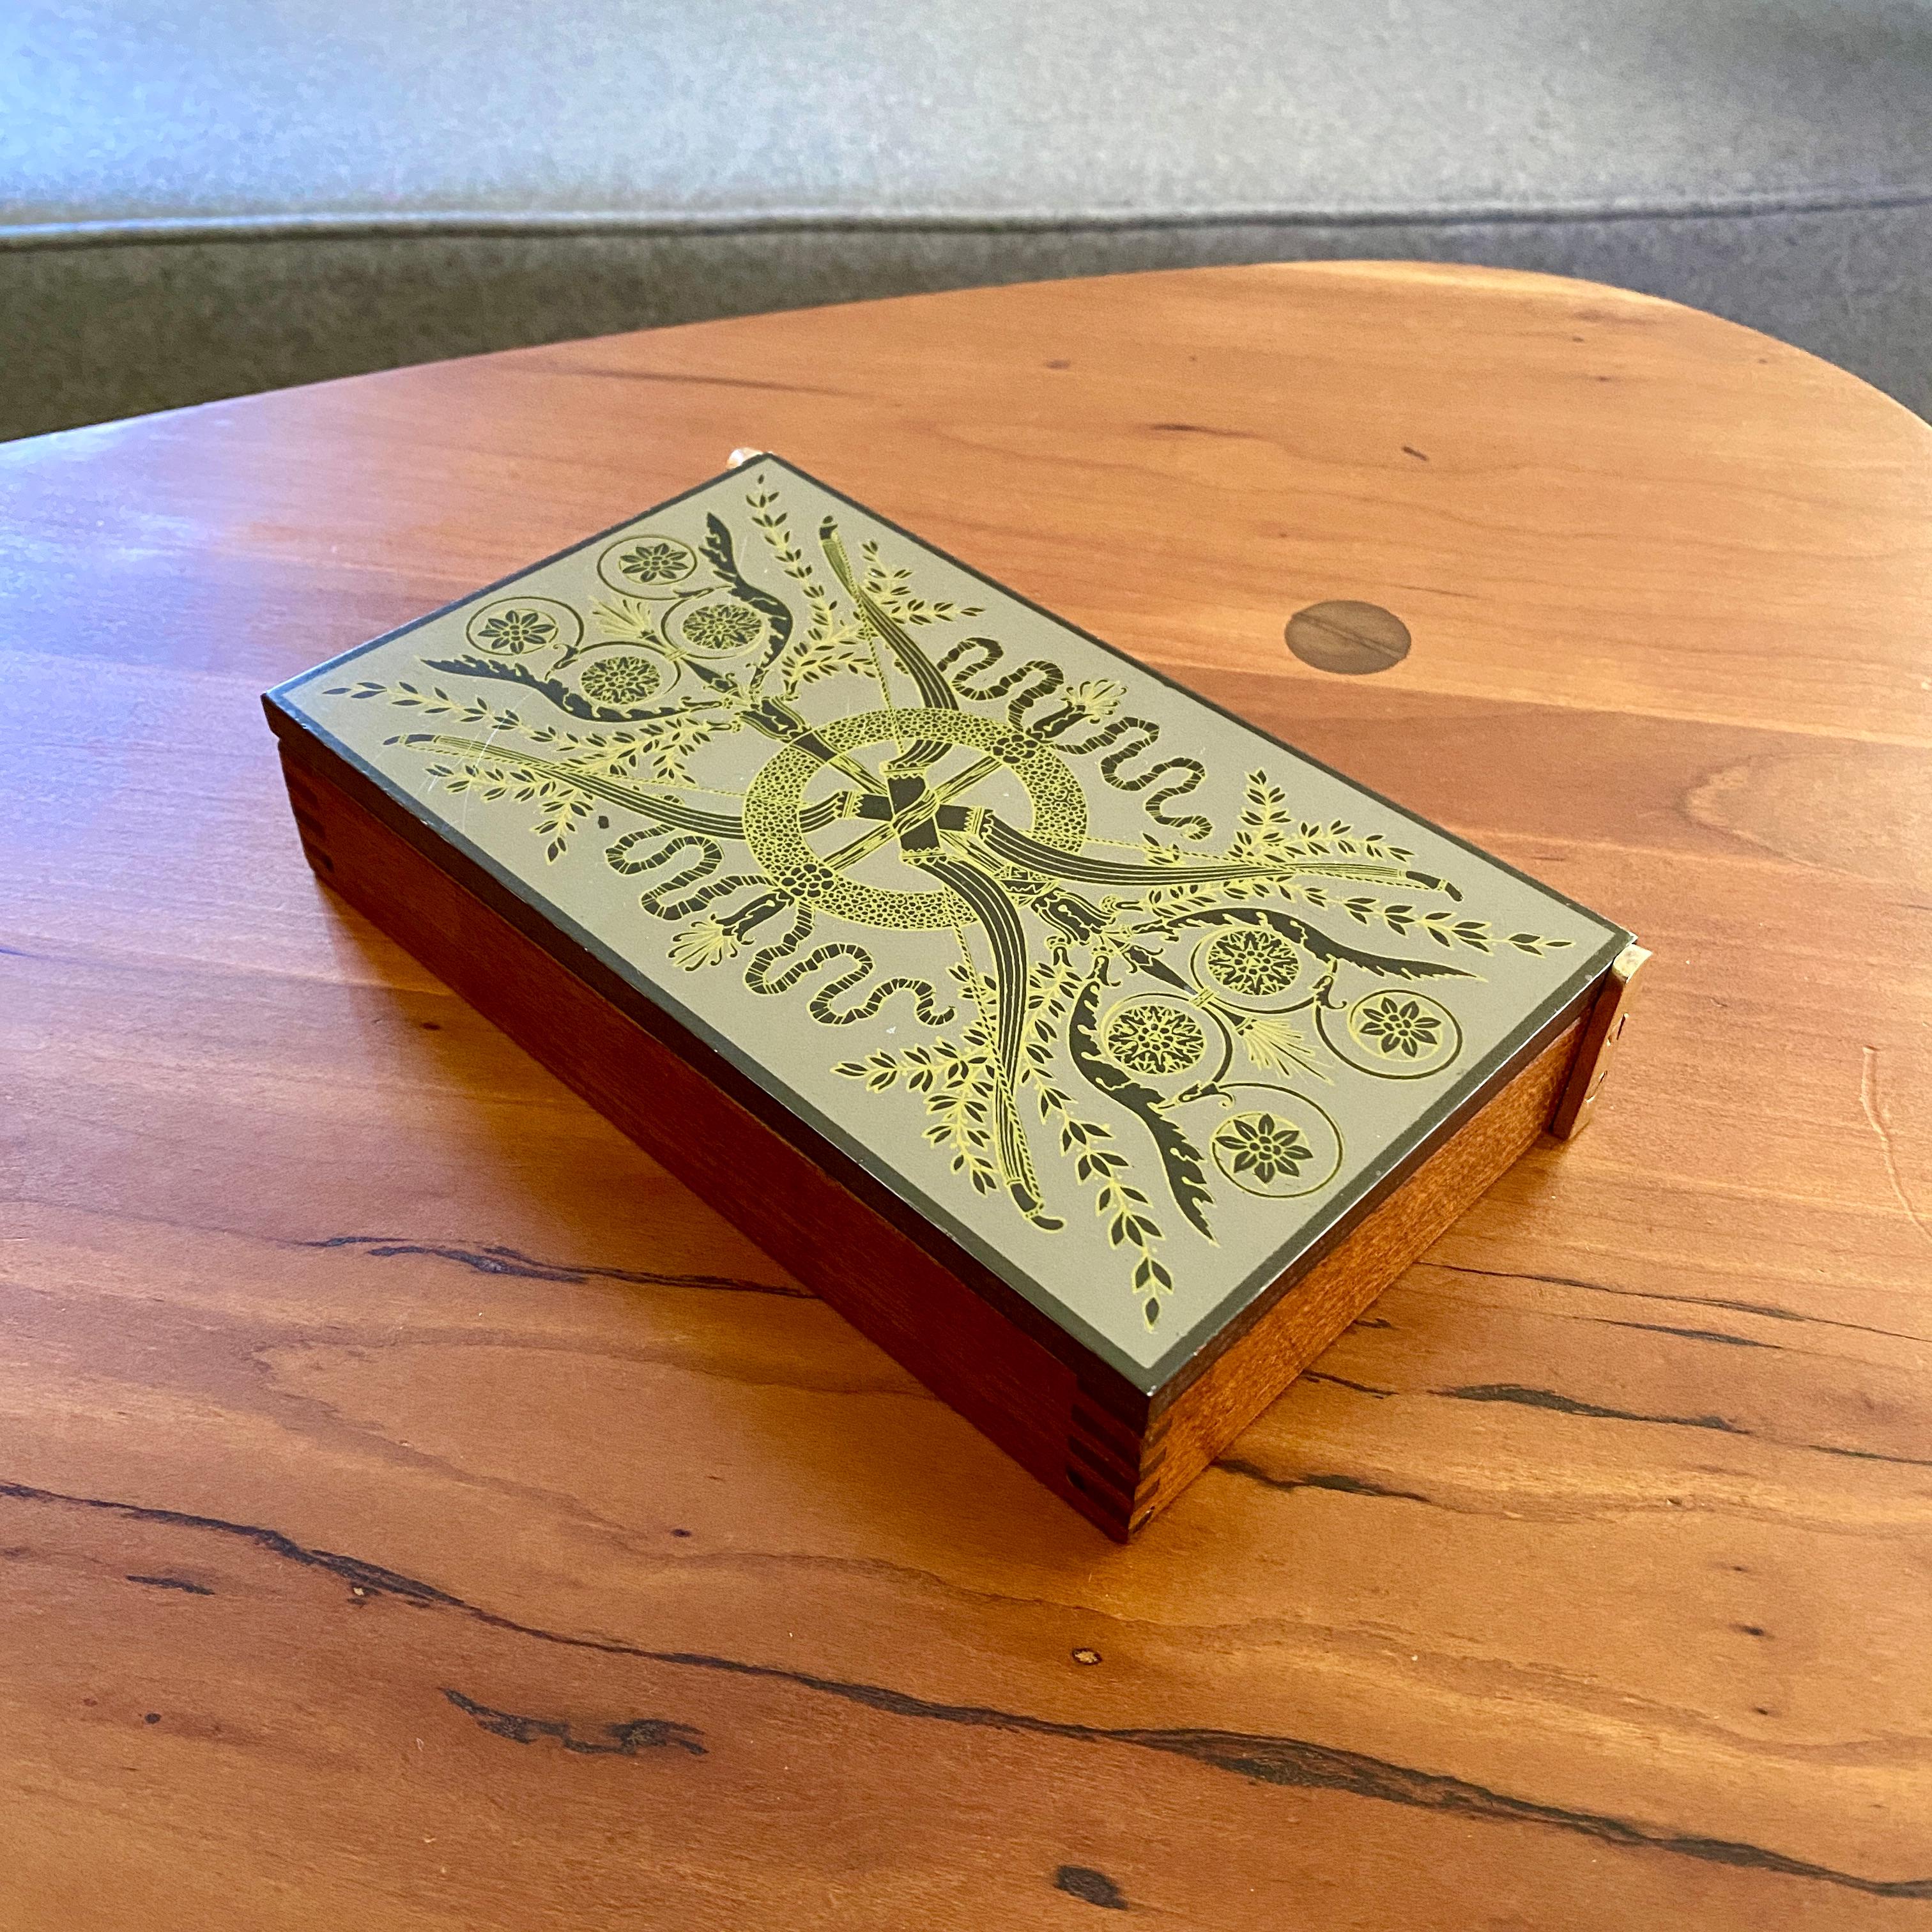 A vintage box with a brass hinged lid. The box was designed by Piero Fornasetti in the 1950s / 1960s. The box is composed of what appears to be a mahogany dovetailed wooden box, brass side hinges and with what looks to be a wood top with laminated